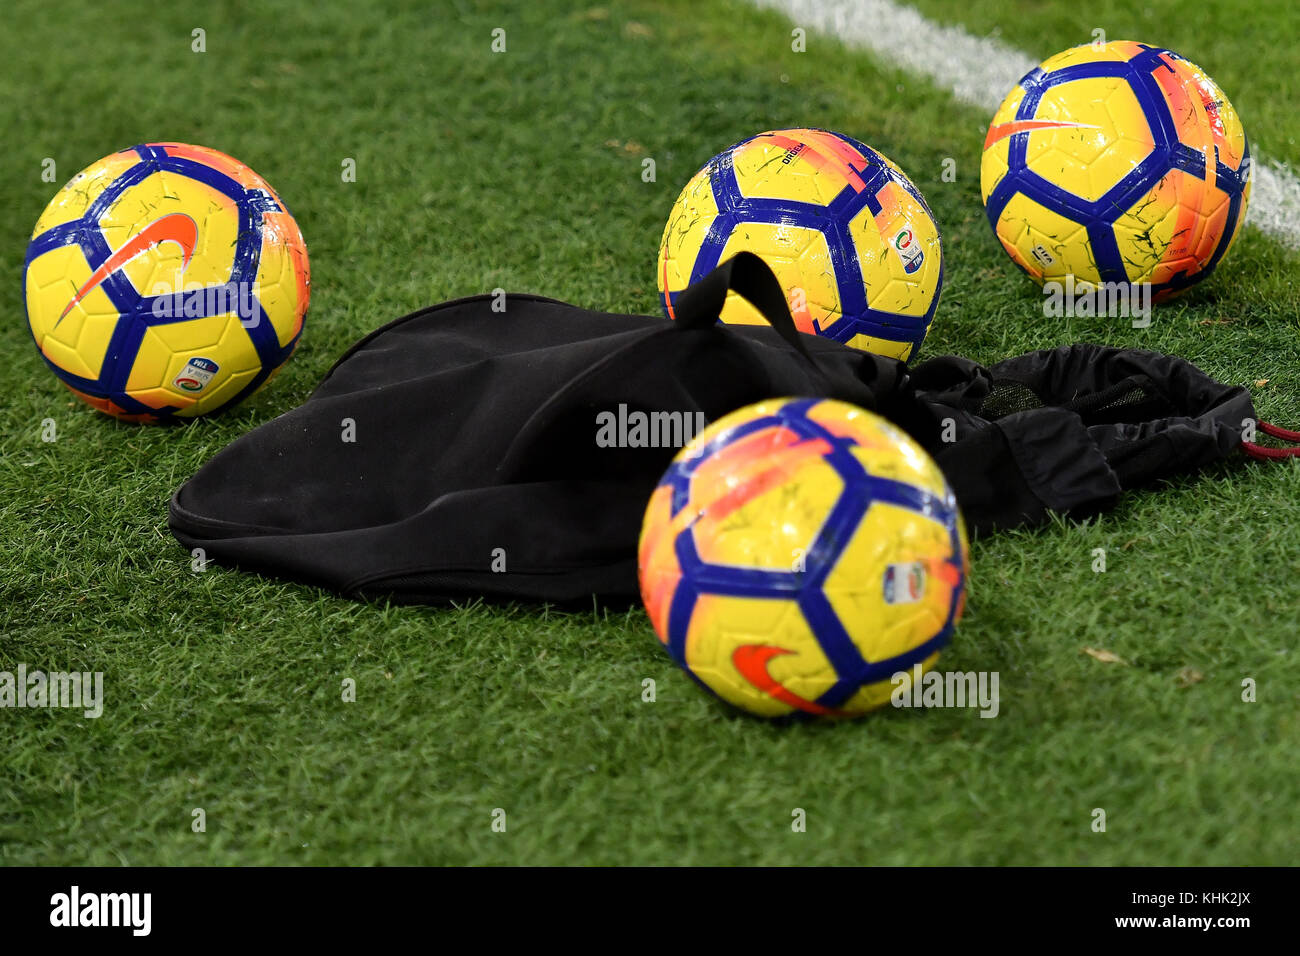 Nike Football 2018 High Resolution Stock Photography and Images - Alamy